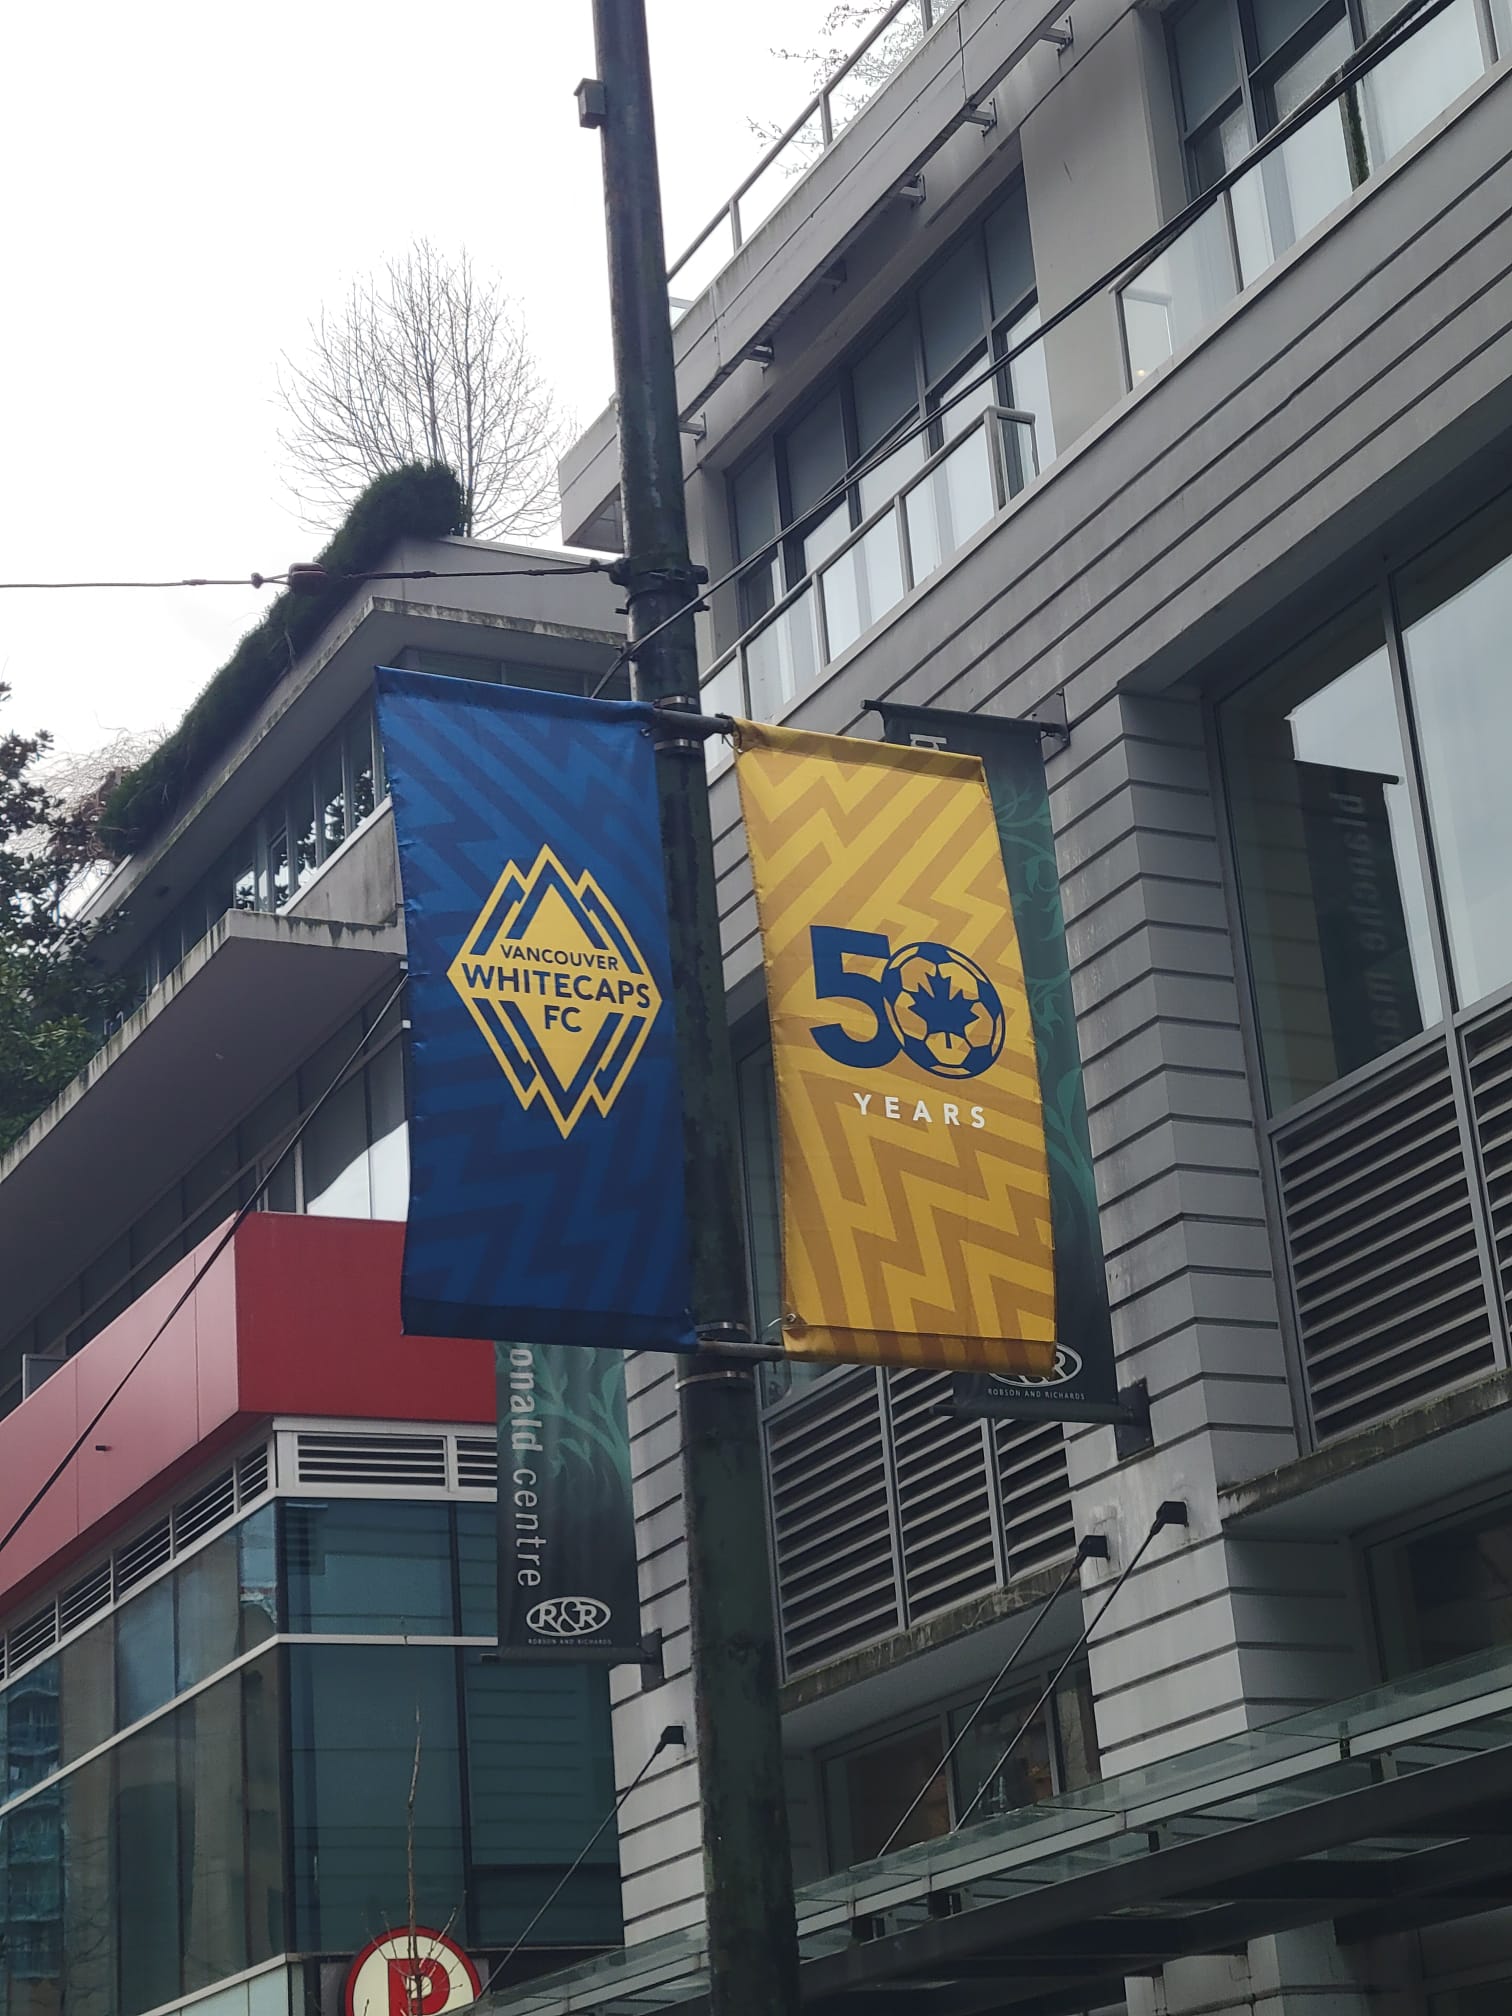 BC Place Vancouver Whitecaps Street Pole Banners 2